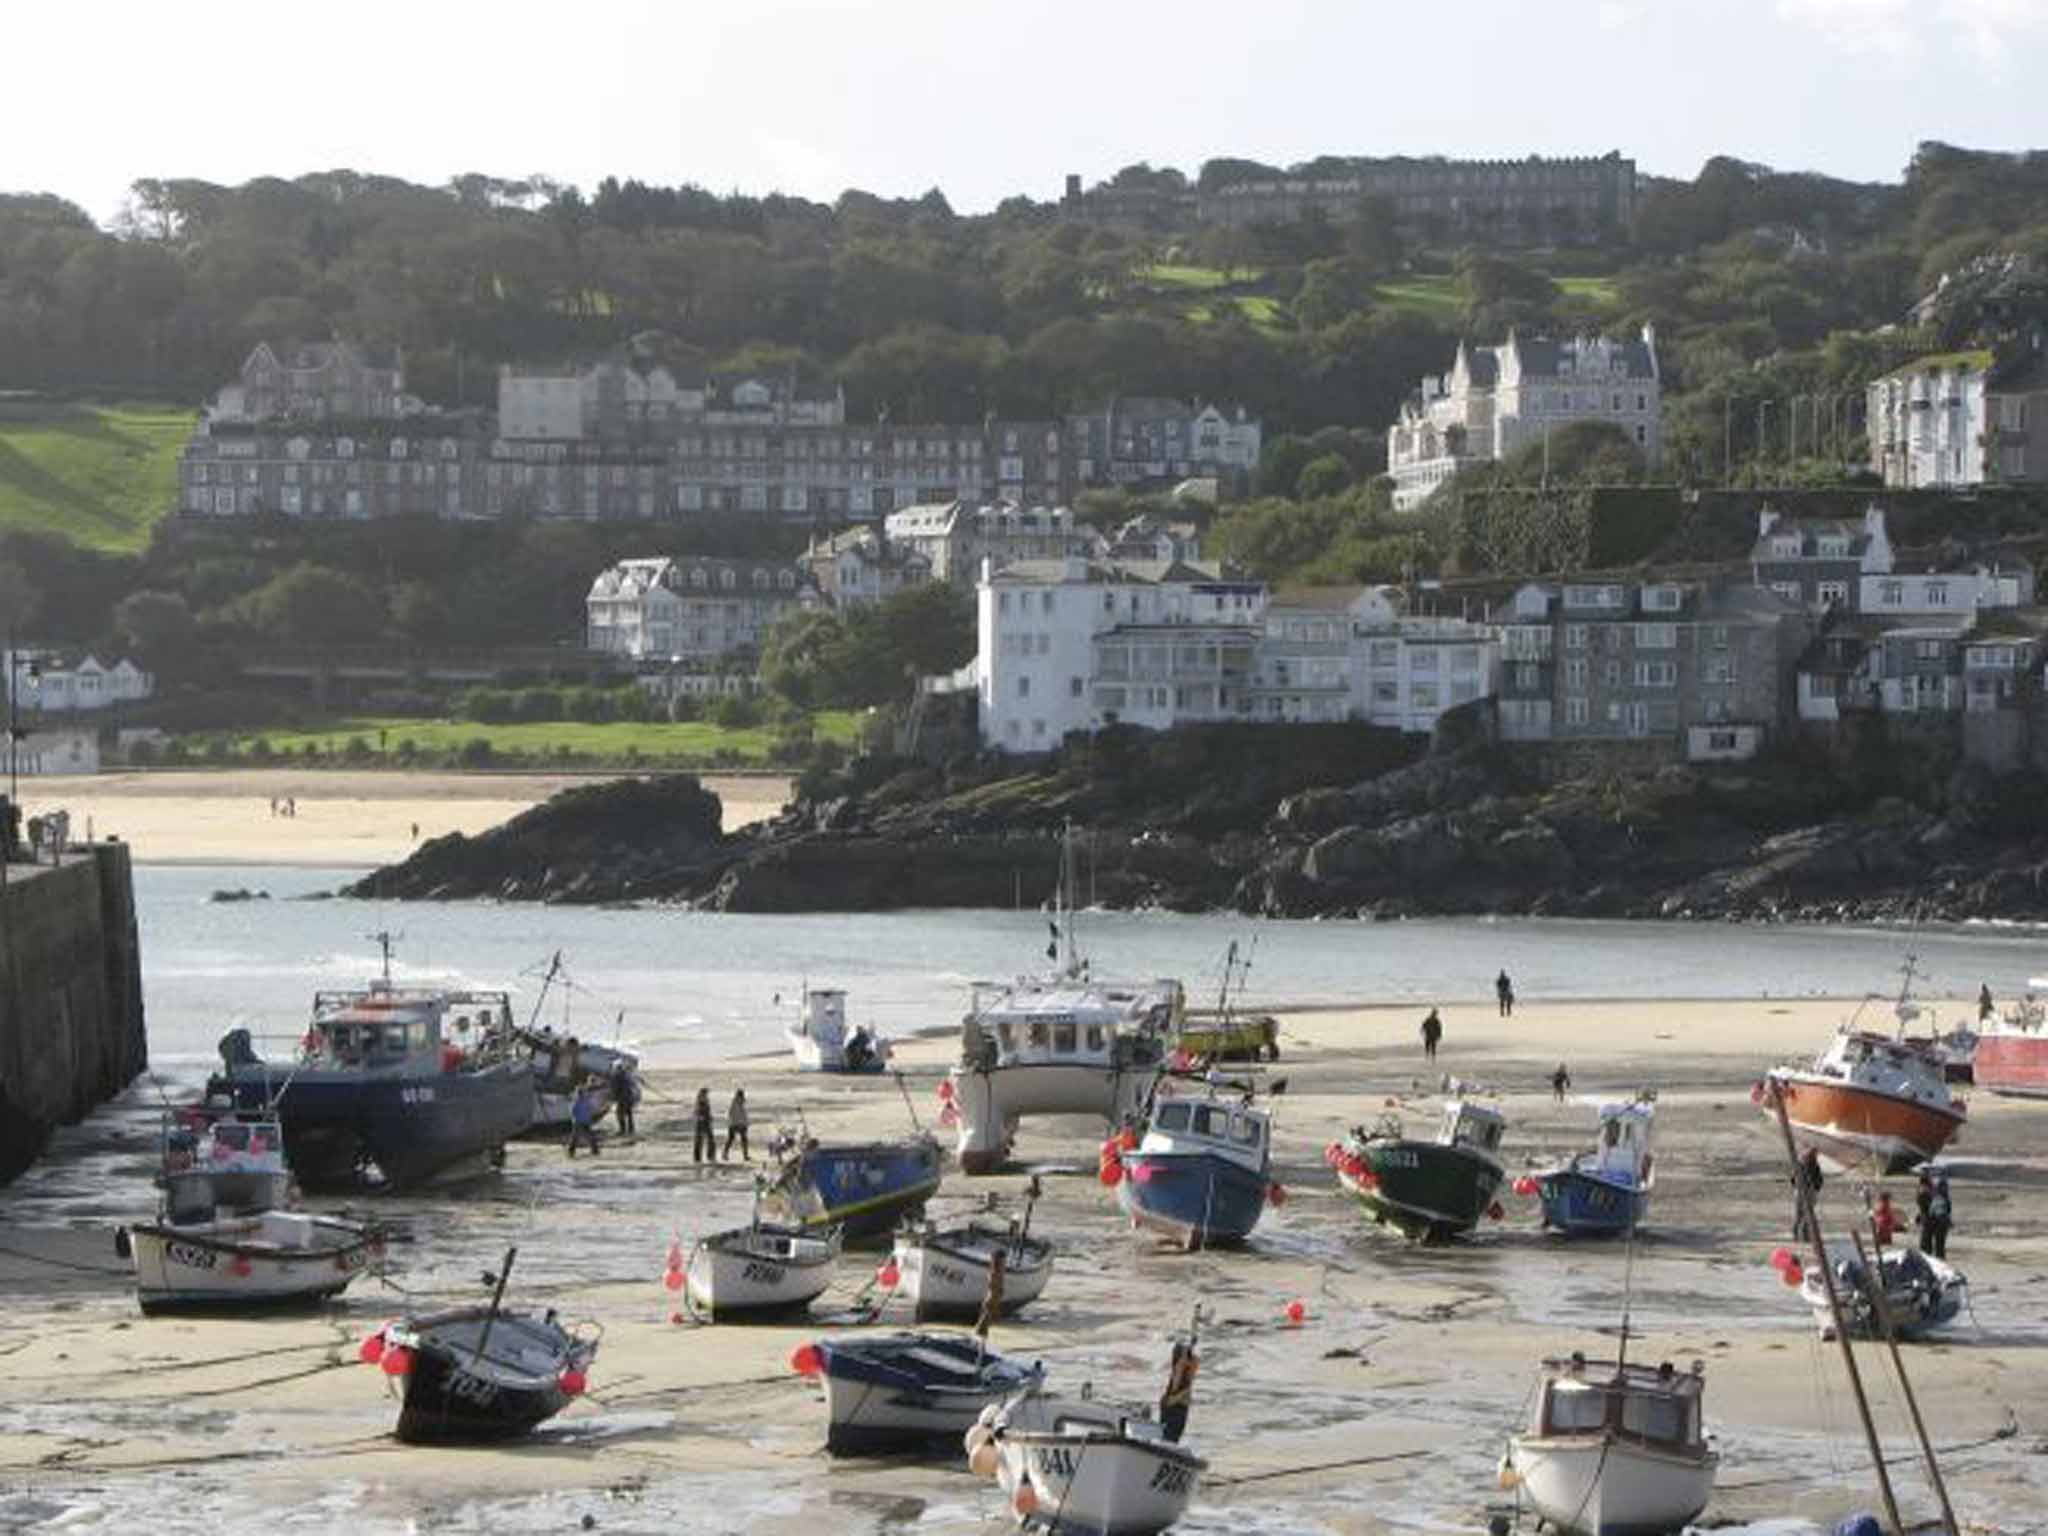 A ban on the building of new homes has been overwhelmingly voted in by the residents of St Ives in Cornwall